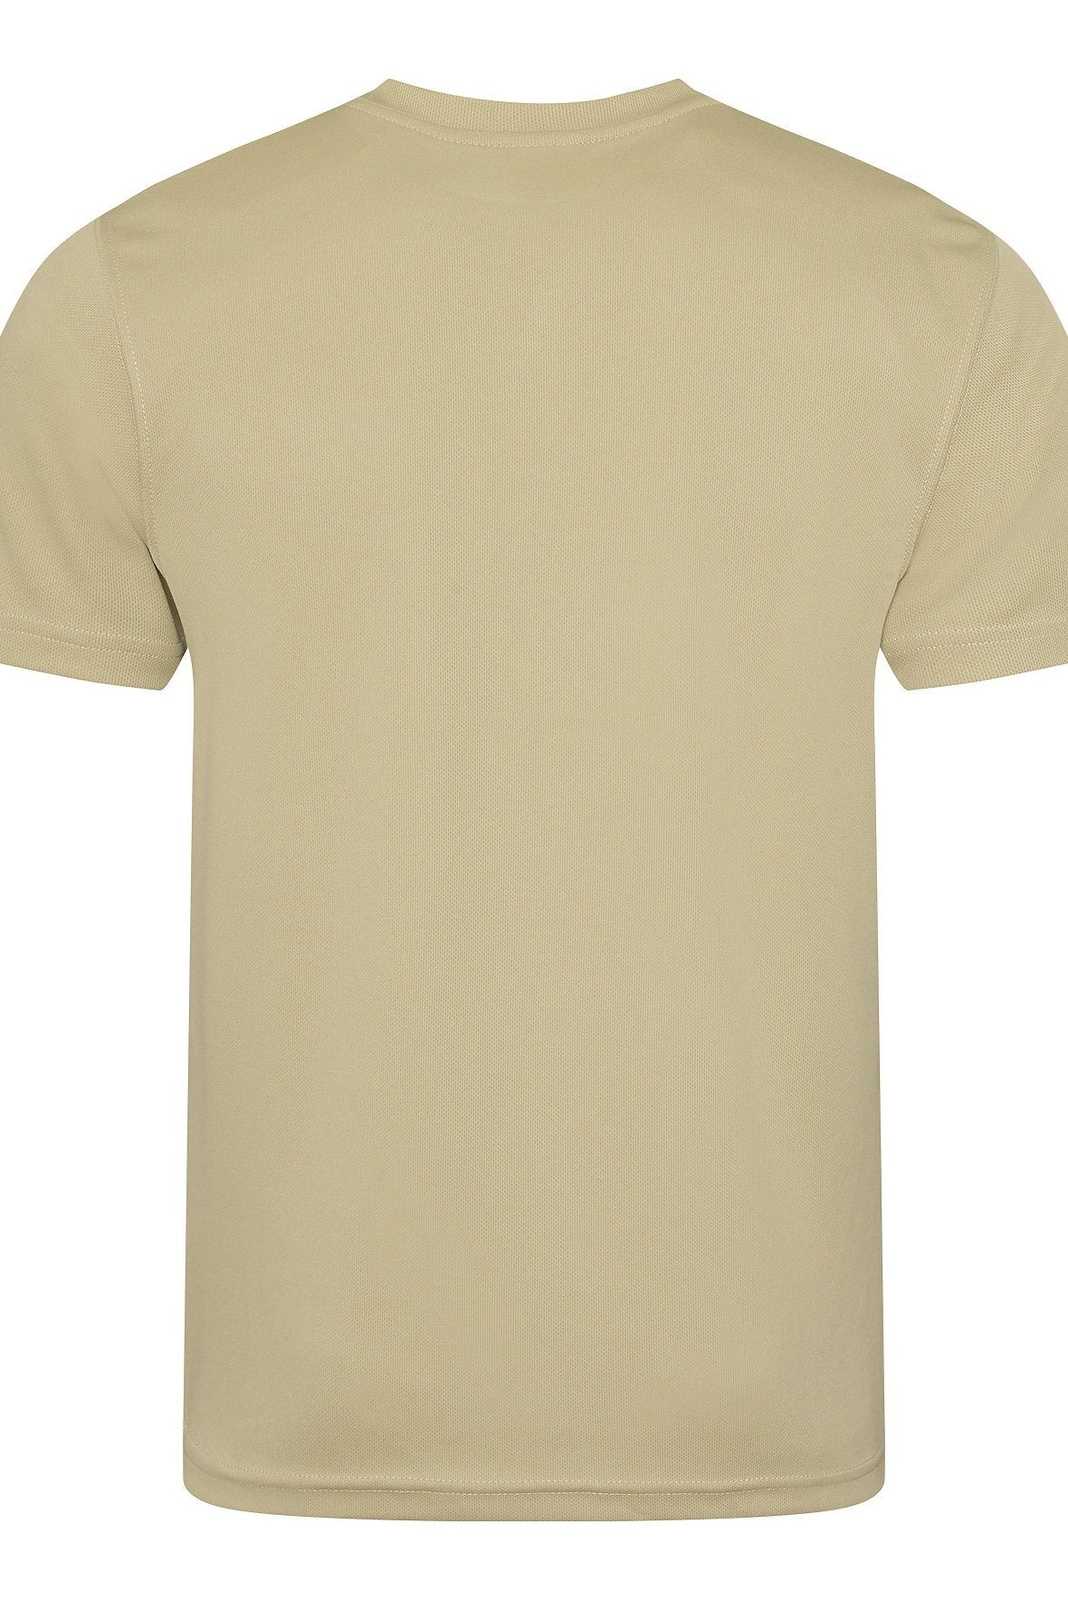 Just Cool JCA001 Cool Tee - Desert Sand - HIT a Double